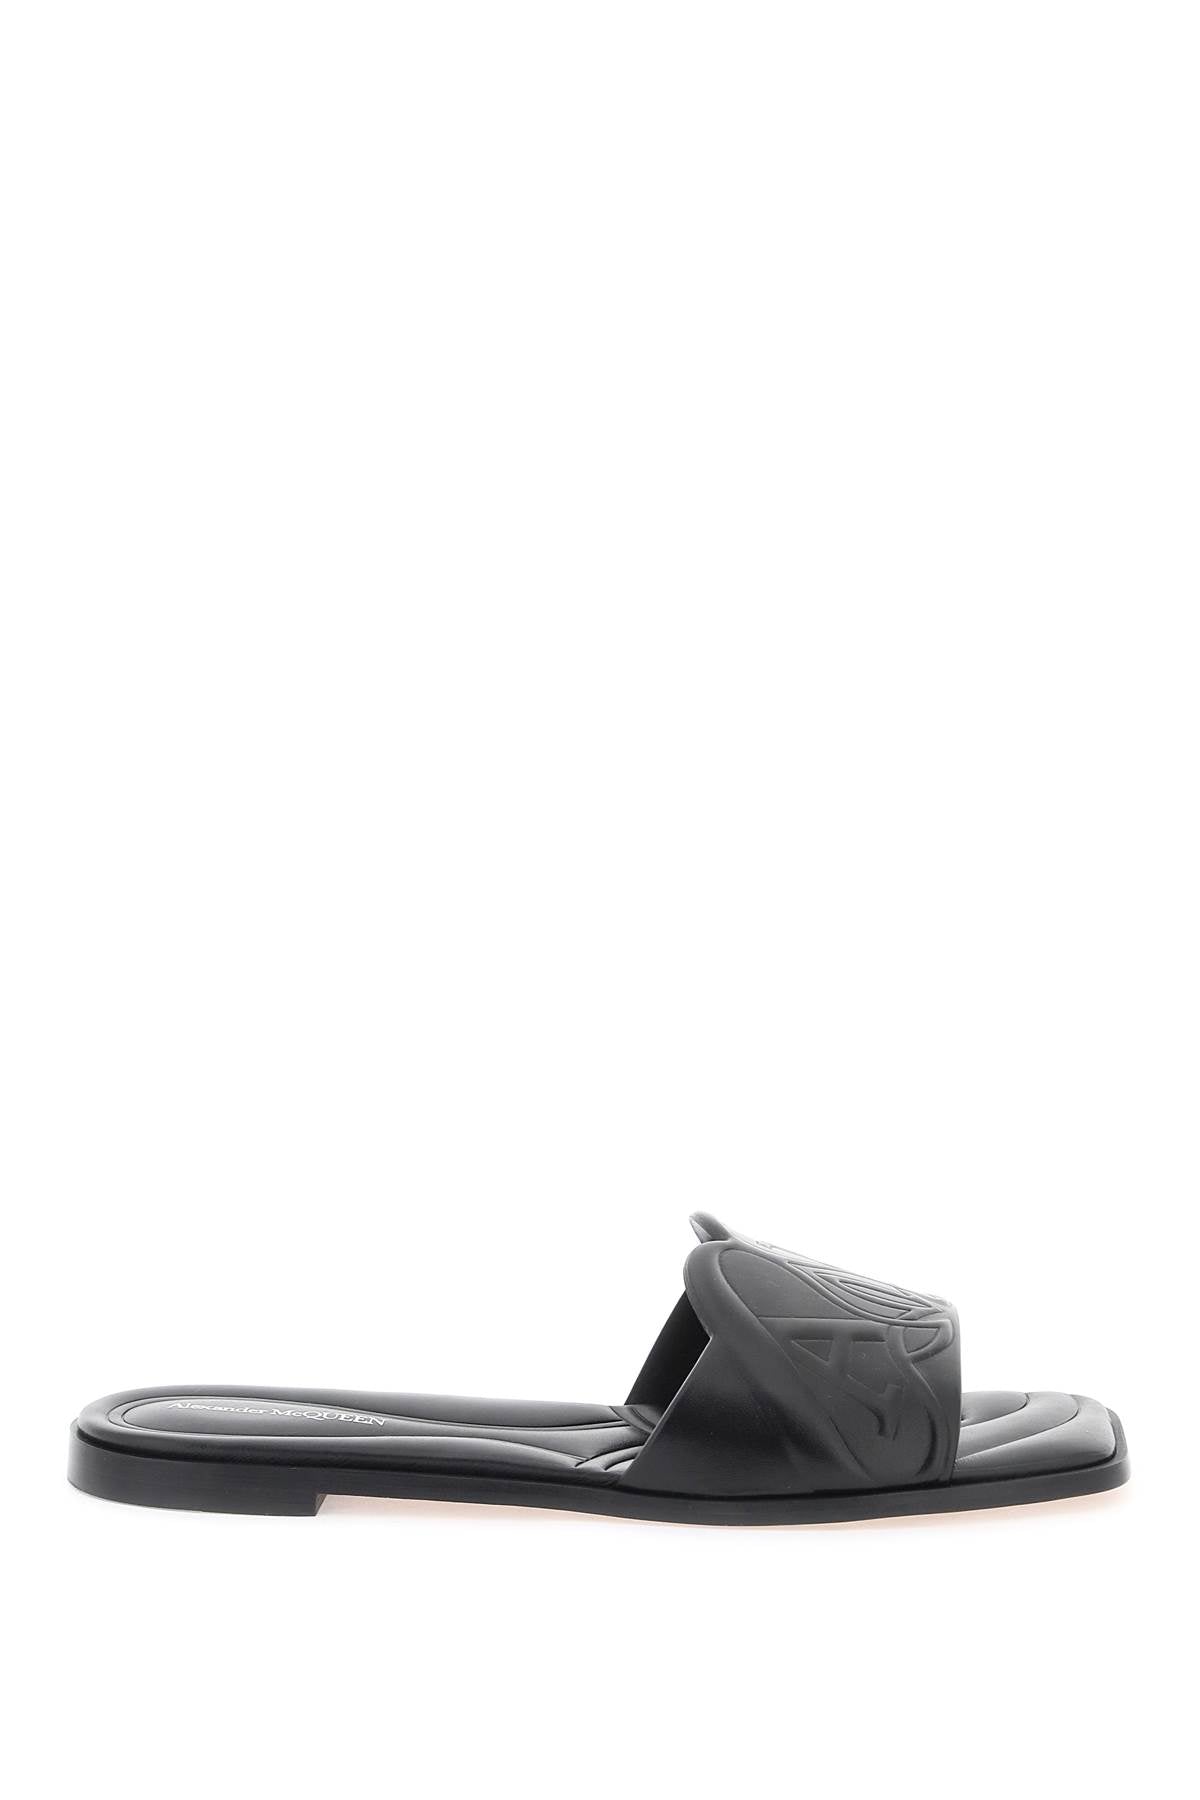 Alexander mcqueen leather slides with embossed seal logo 780714 WIEAD BLACK